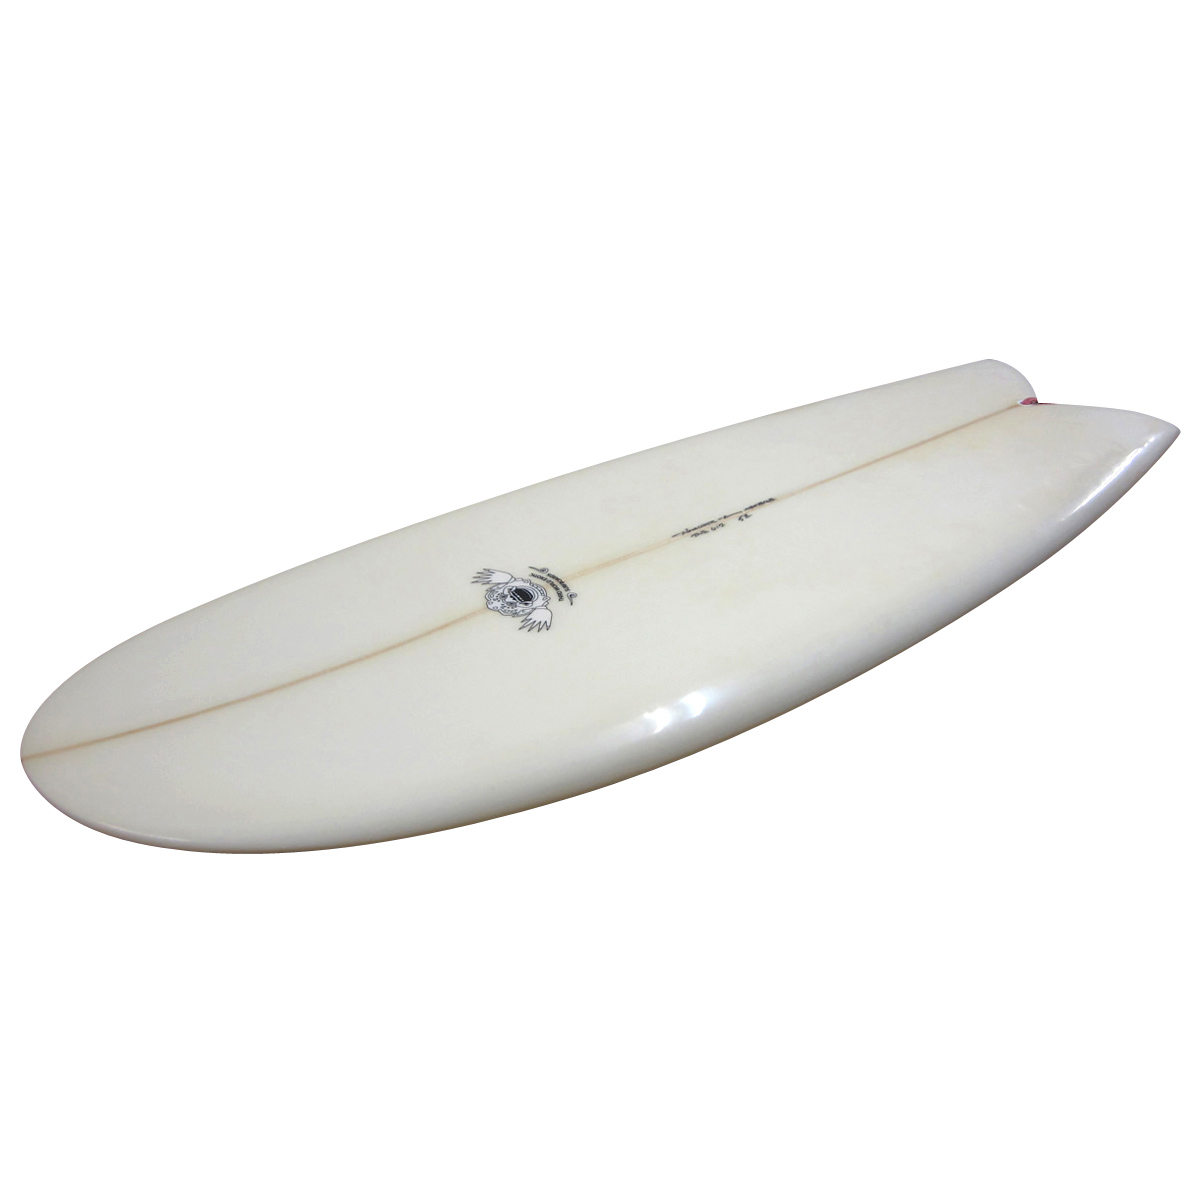 LARRY MABILE SURFBOARDS / 5`2 Mini Simmons Fish Tail